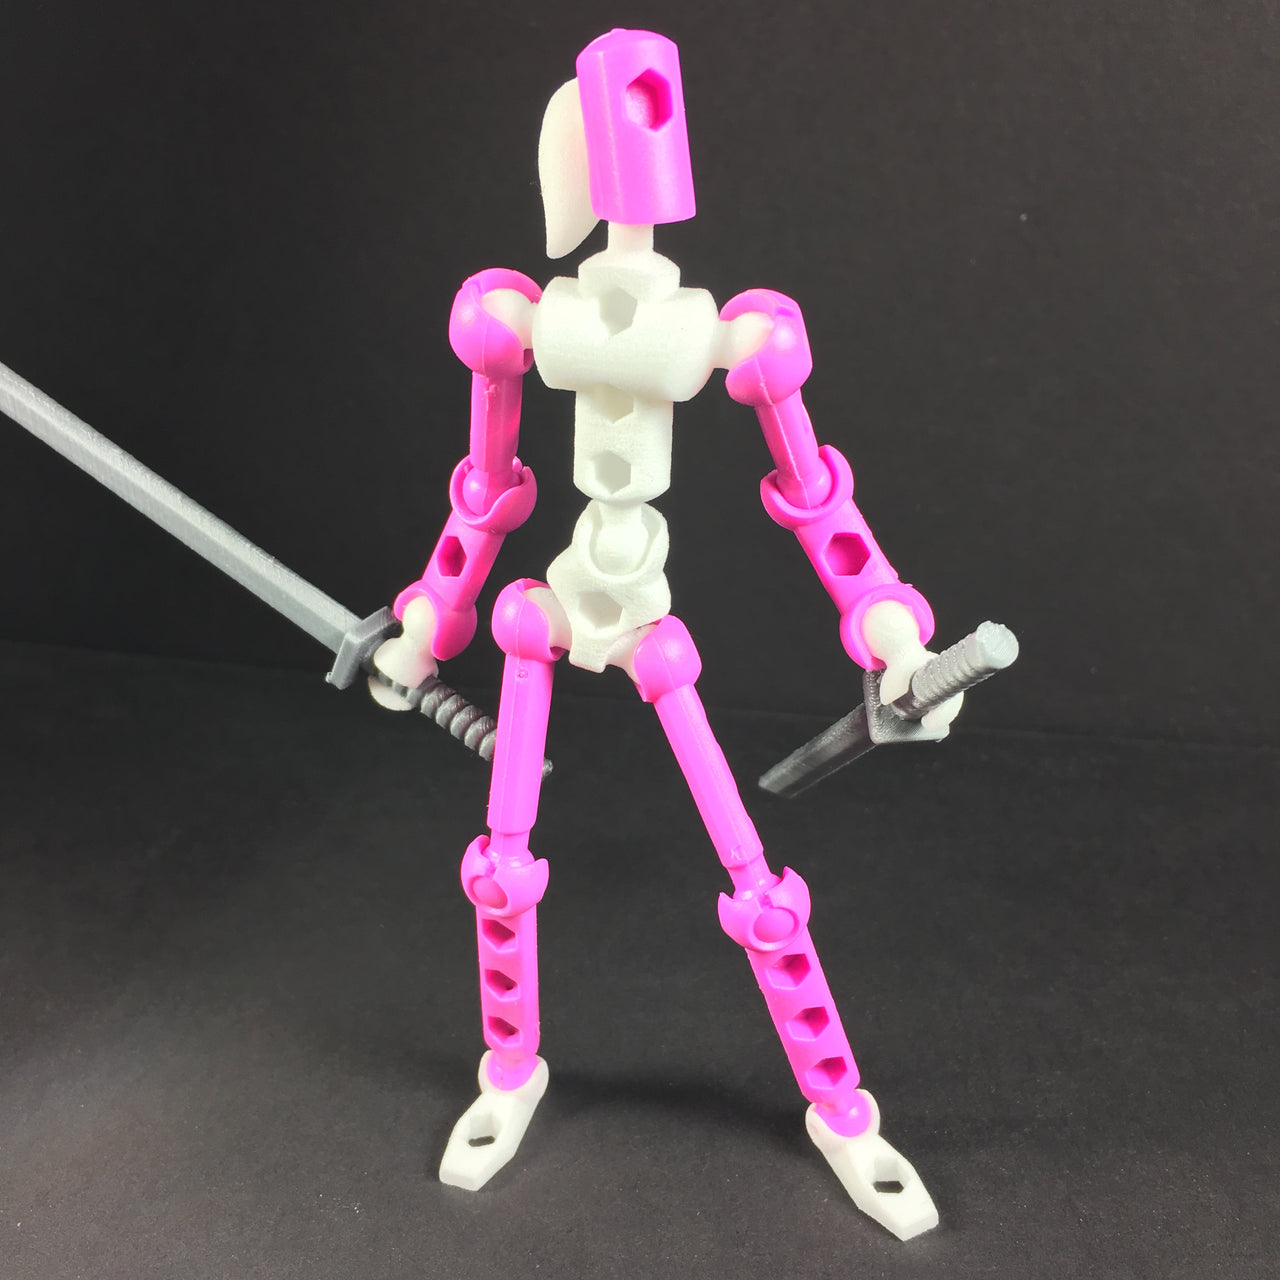 Making female figures with the Moli Modifier upgrade kit